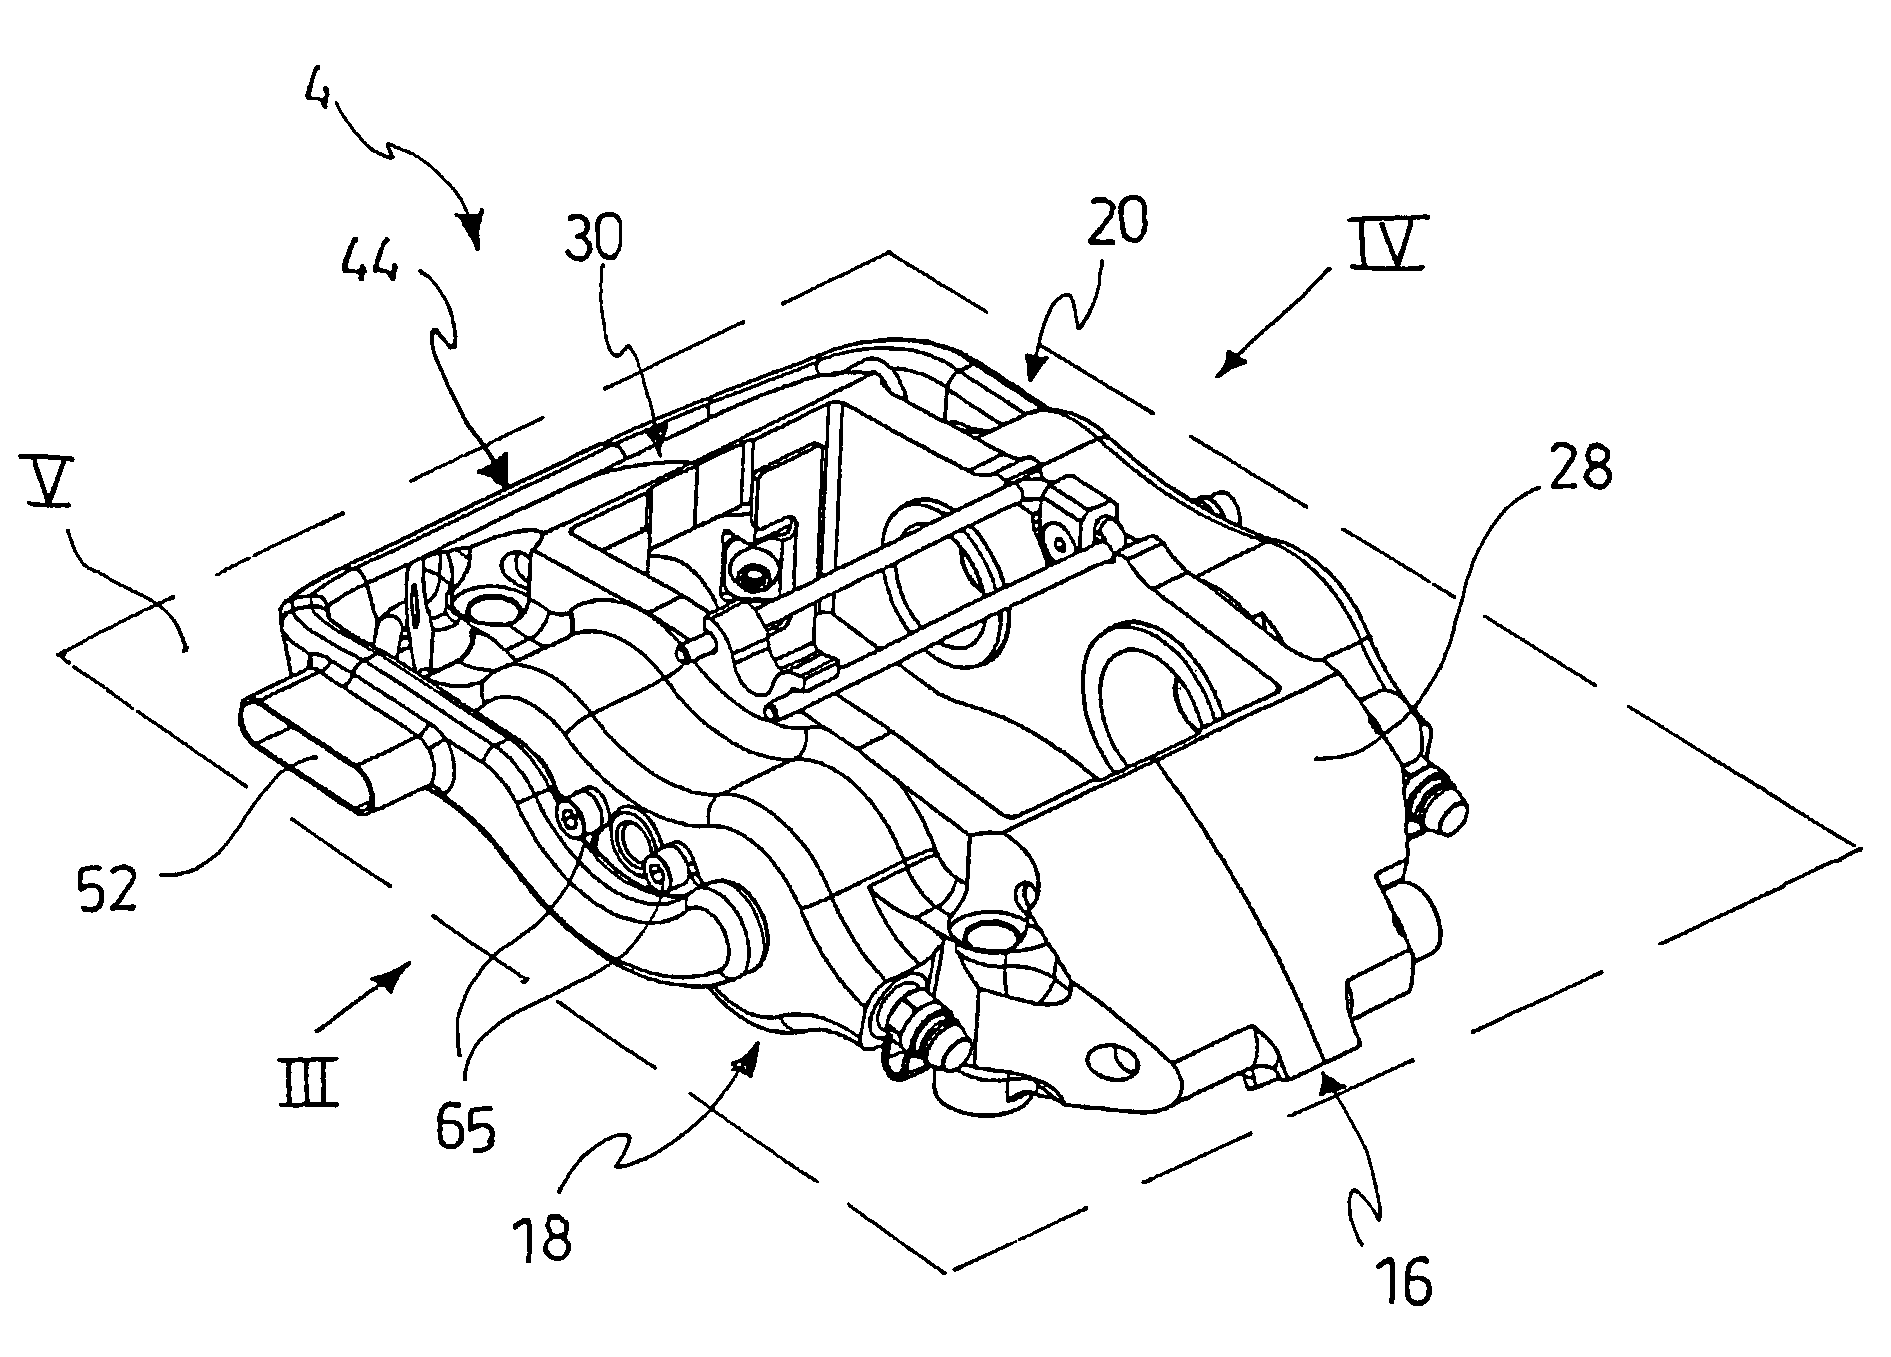 Disc brake caliper with a cooling duct